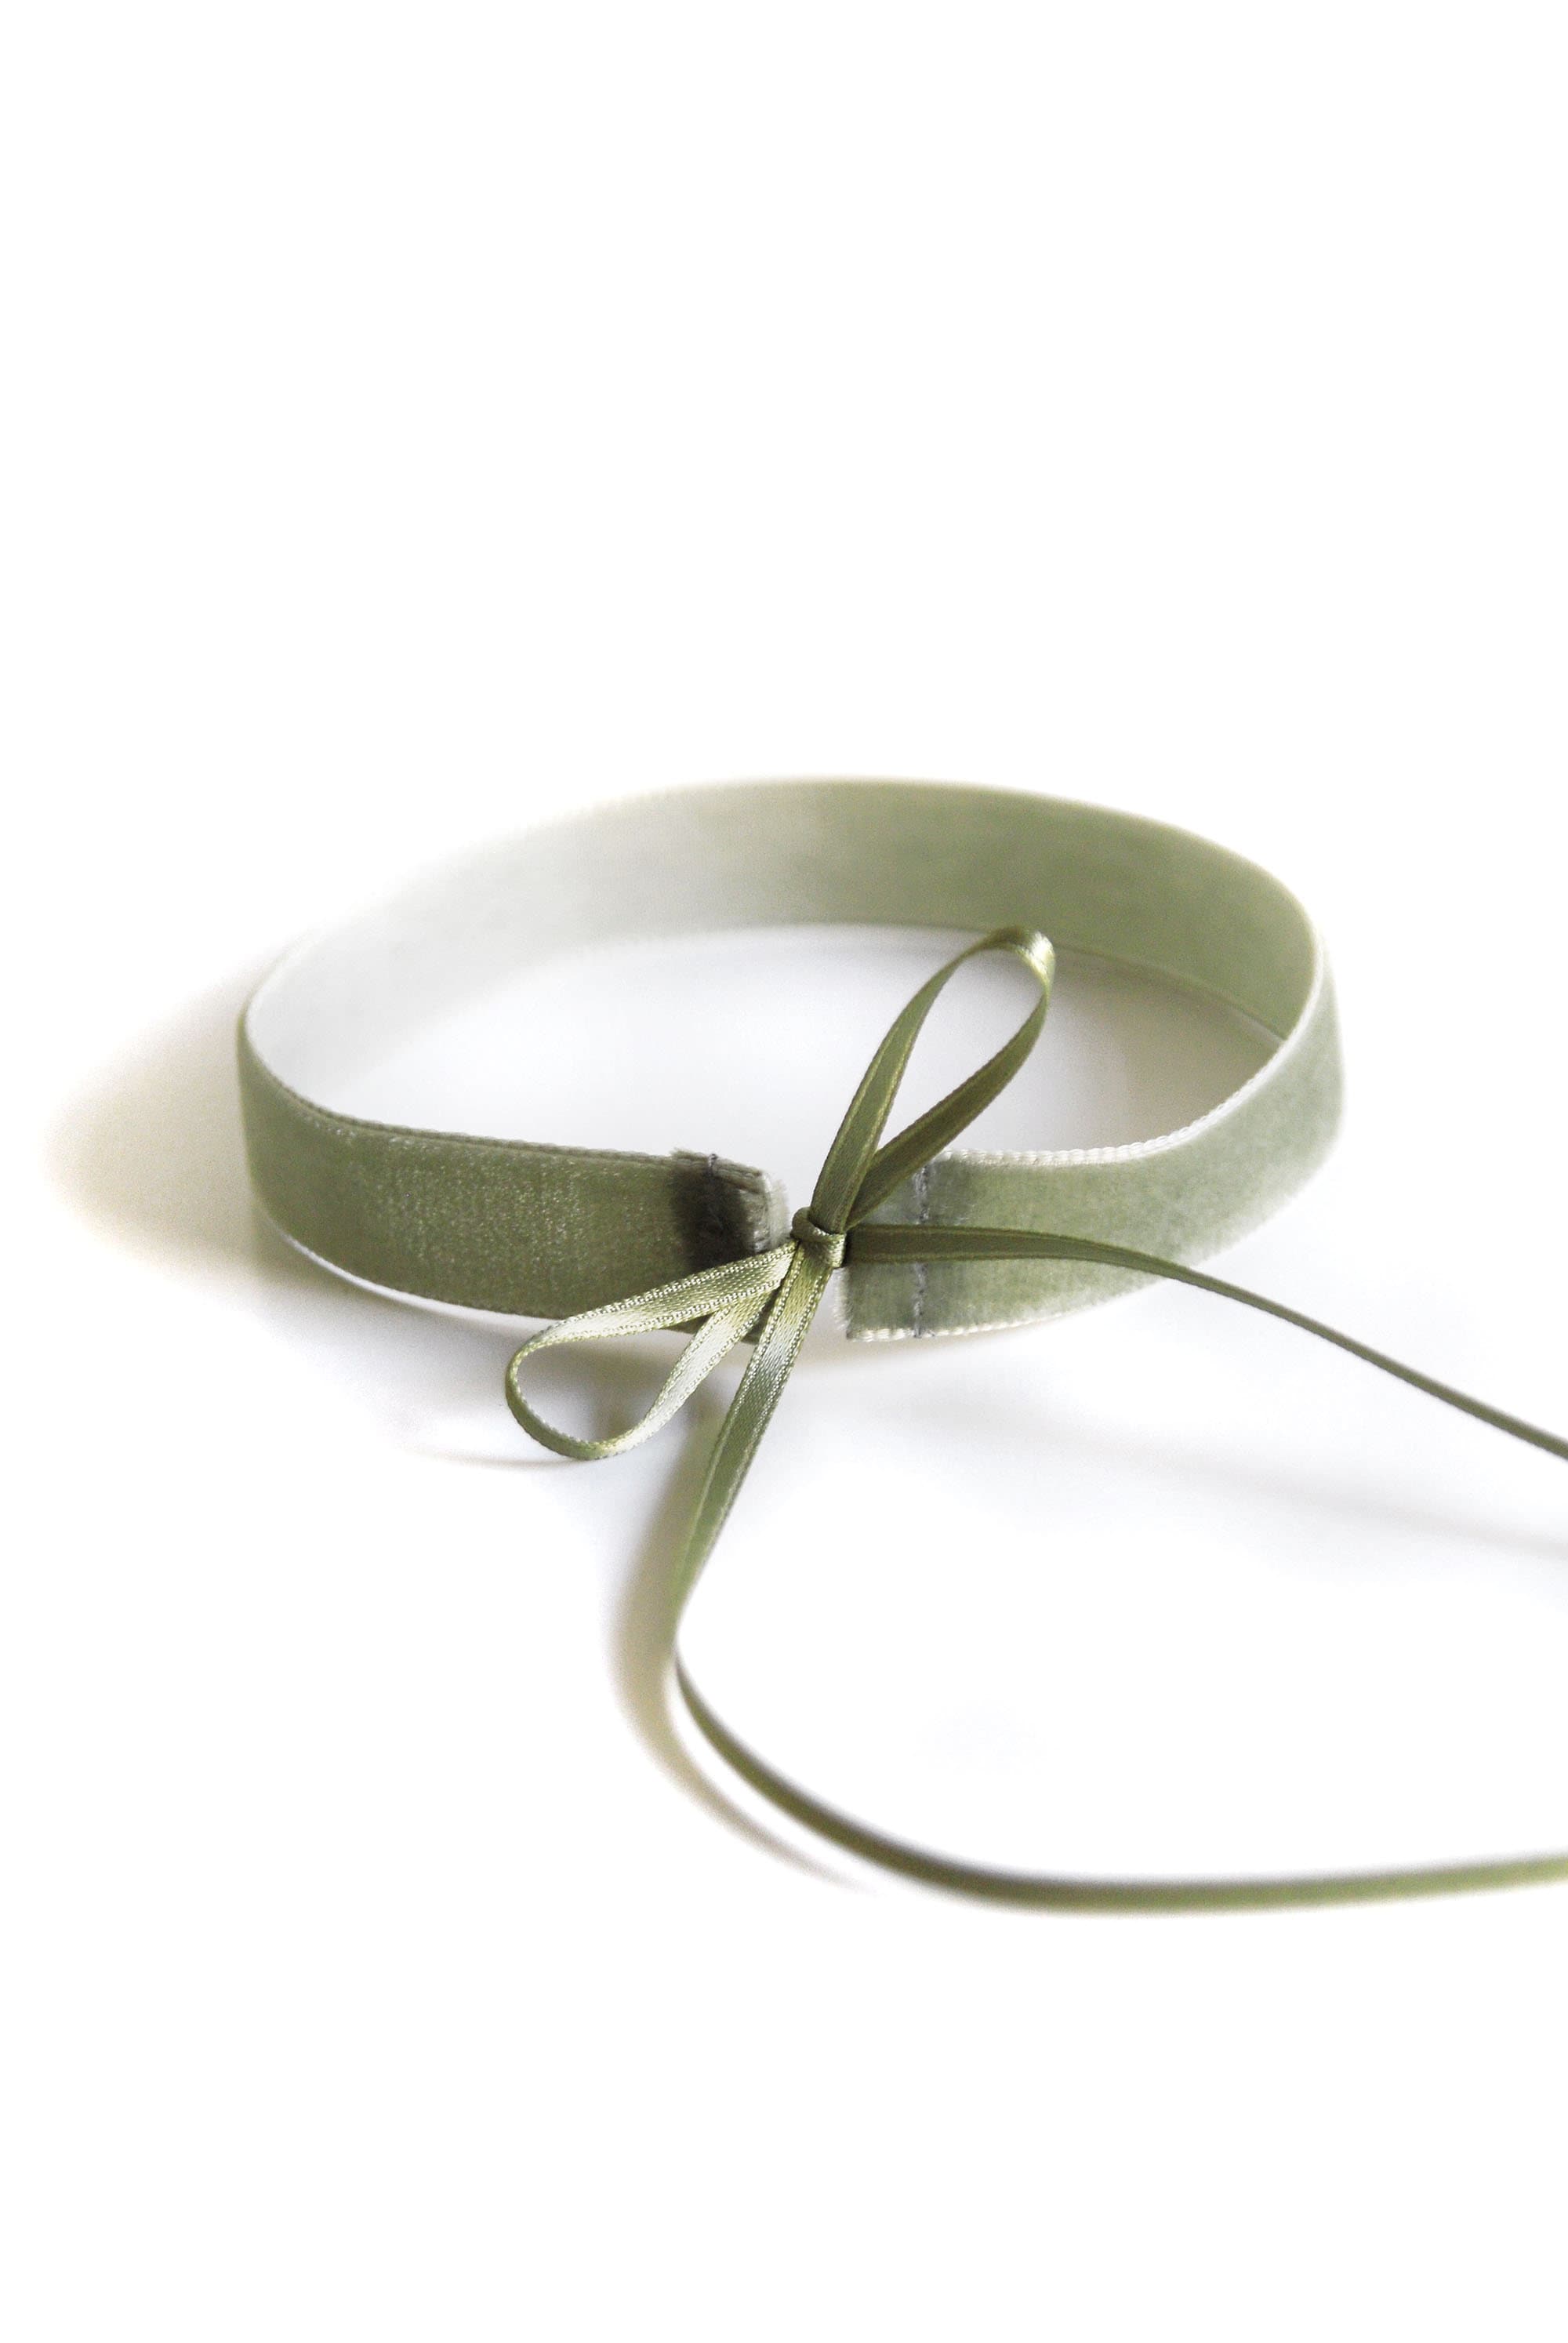 Sage Green Velvet Ribbon for Weddings, Invites, Flowers and Decorations,  Berisfords Premium Quality, 5 Widths Narrow to Wide 2m to 20m 